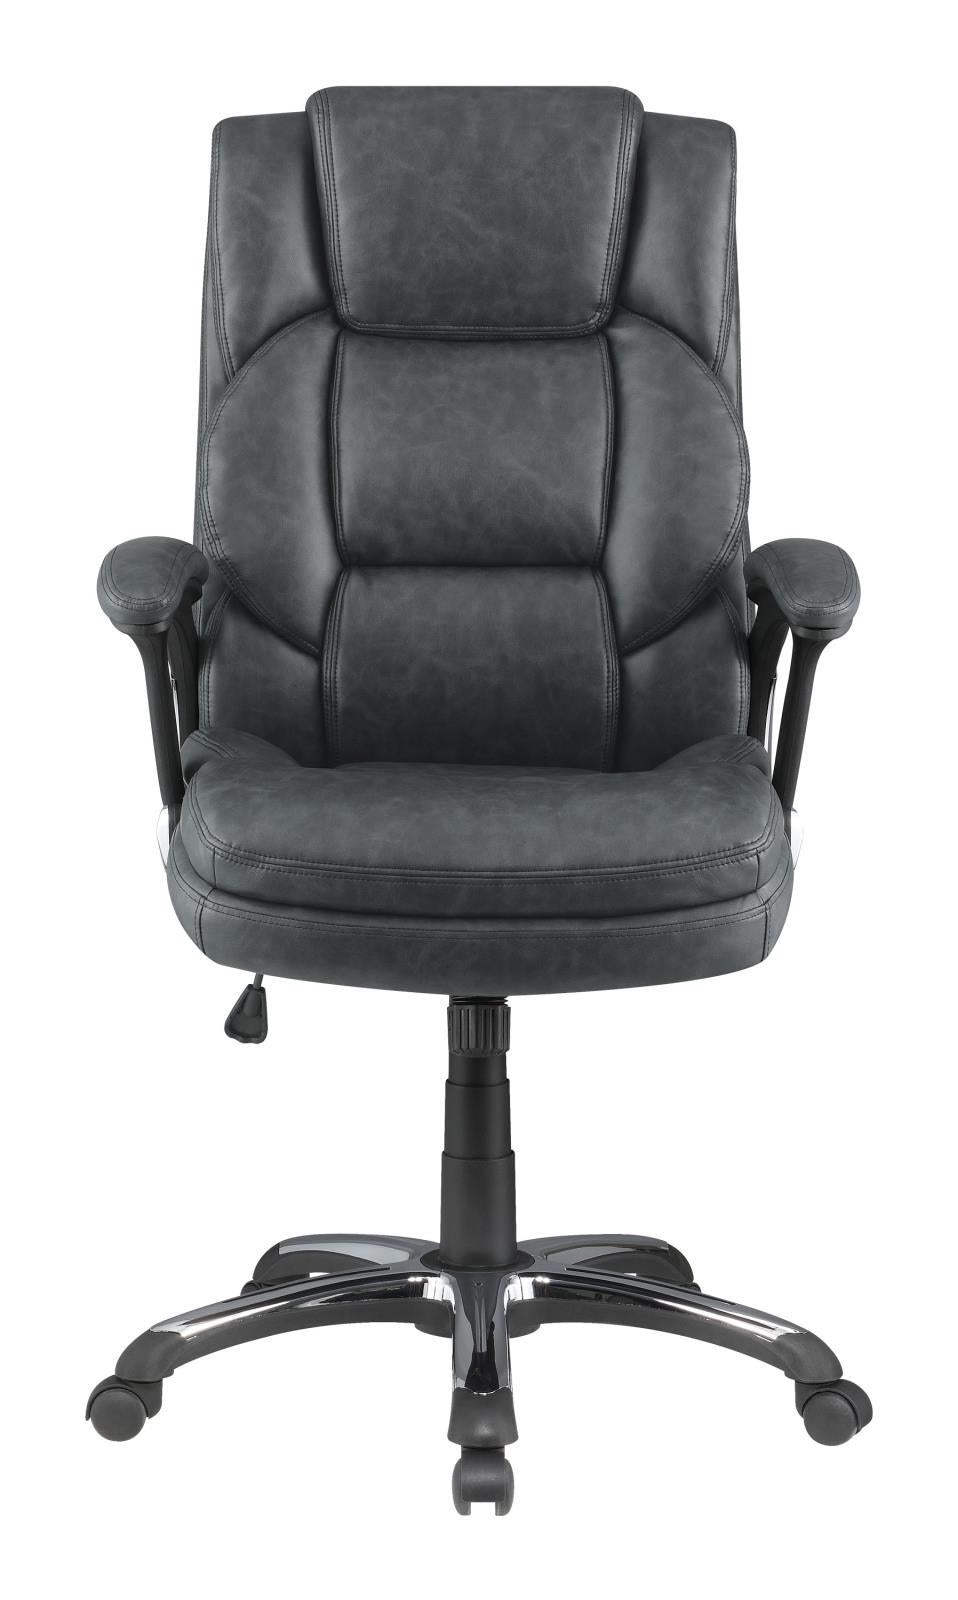 Nerris Adjustable Height Office Chair with Padded Arm Grey and Black Nerris Adjustable Height Office Chair with Padded Arm Grey and Black Half Price Furniture